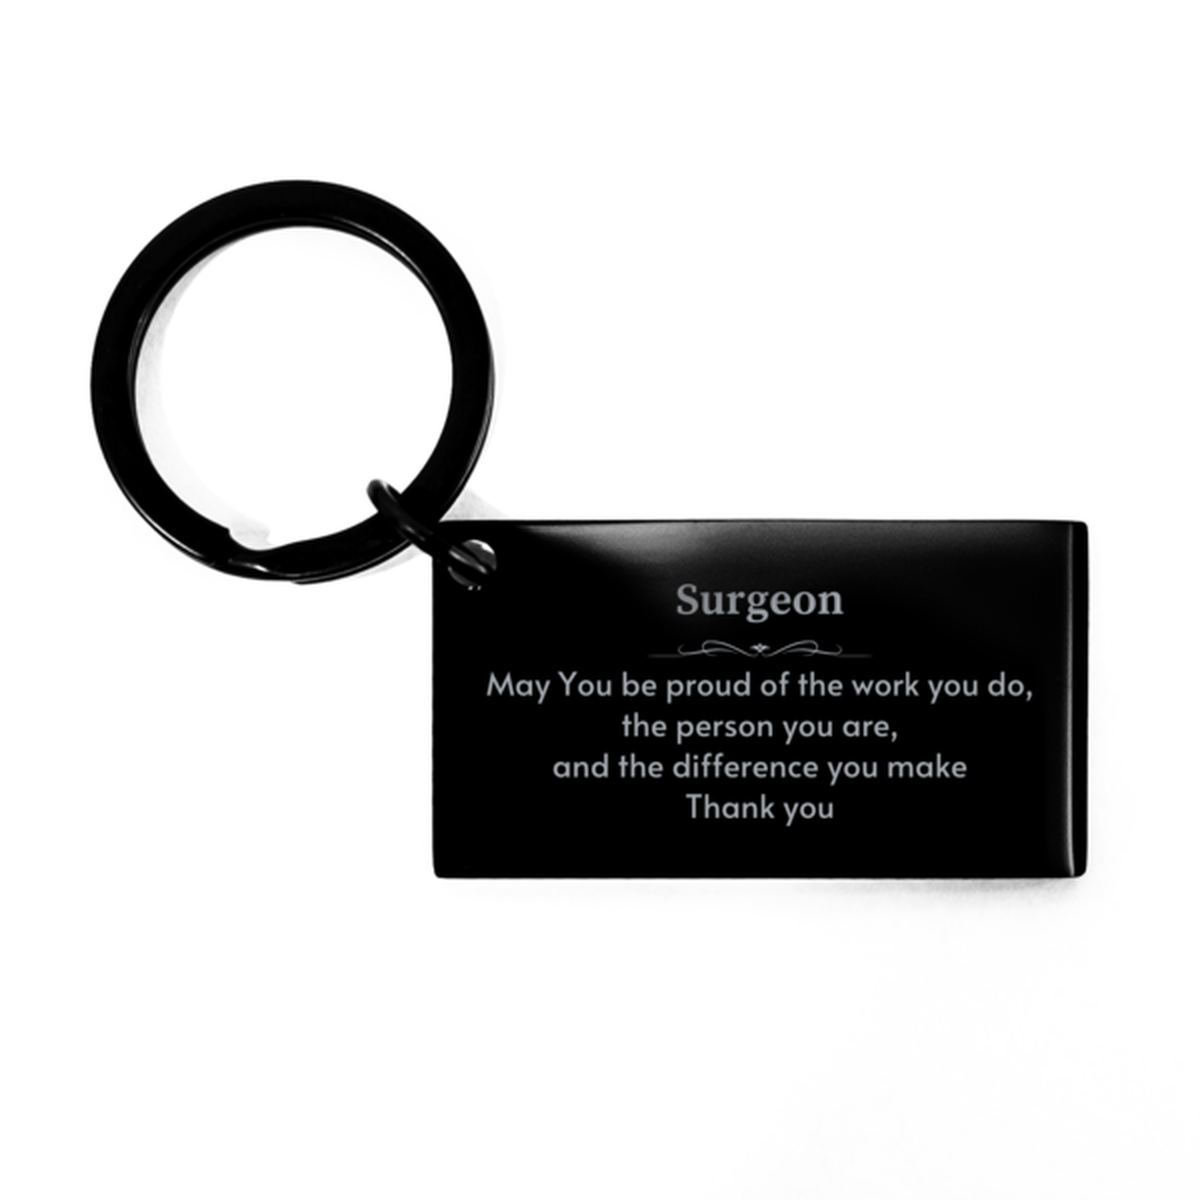 Heartwarming Keychain Retirement Coworkers Gifts for Surgeon, Web Developer May You be proud of the work you do, the person you are Gifts for Boss Men Women Friends